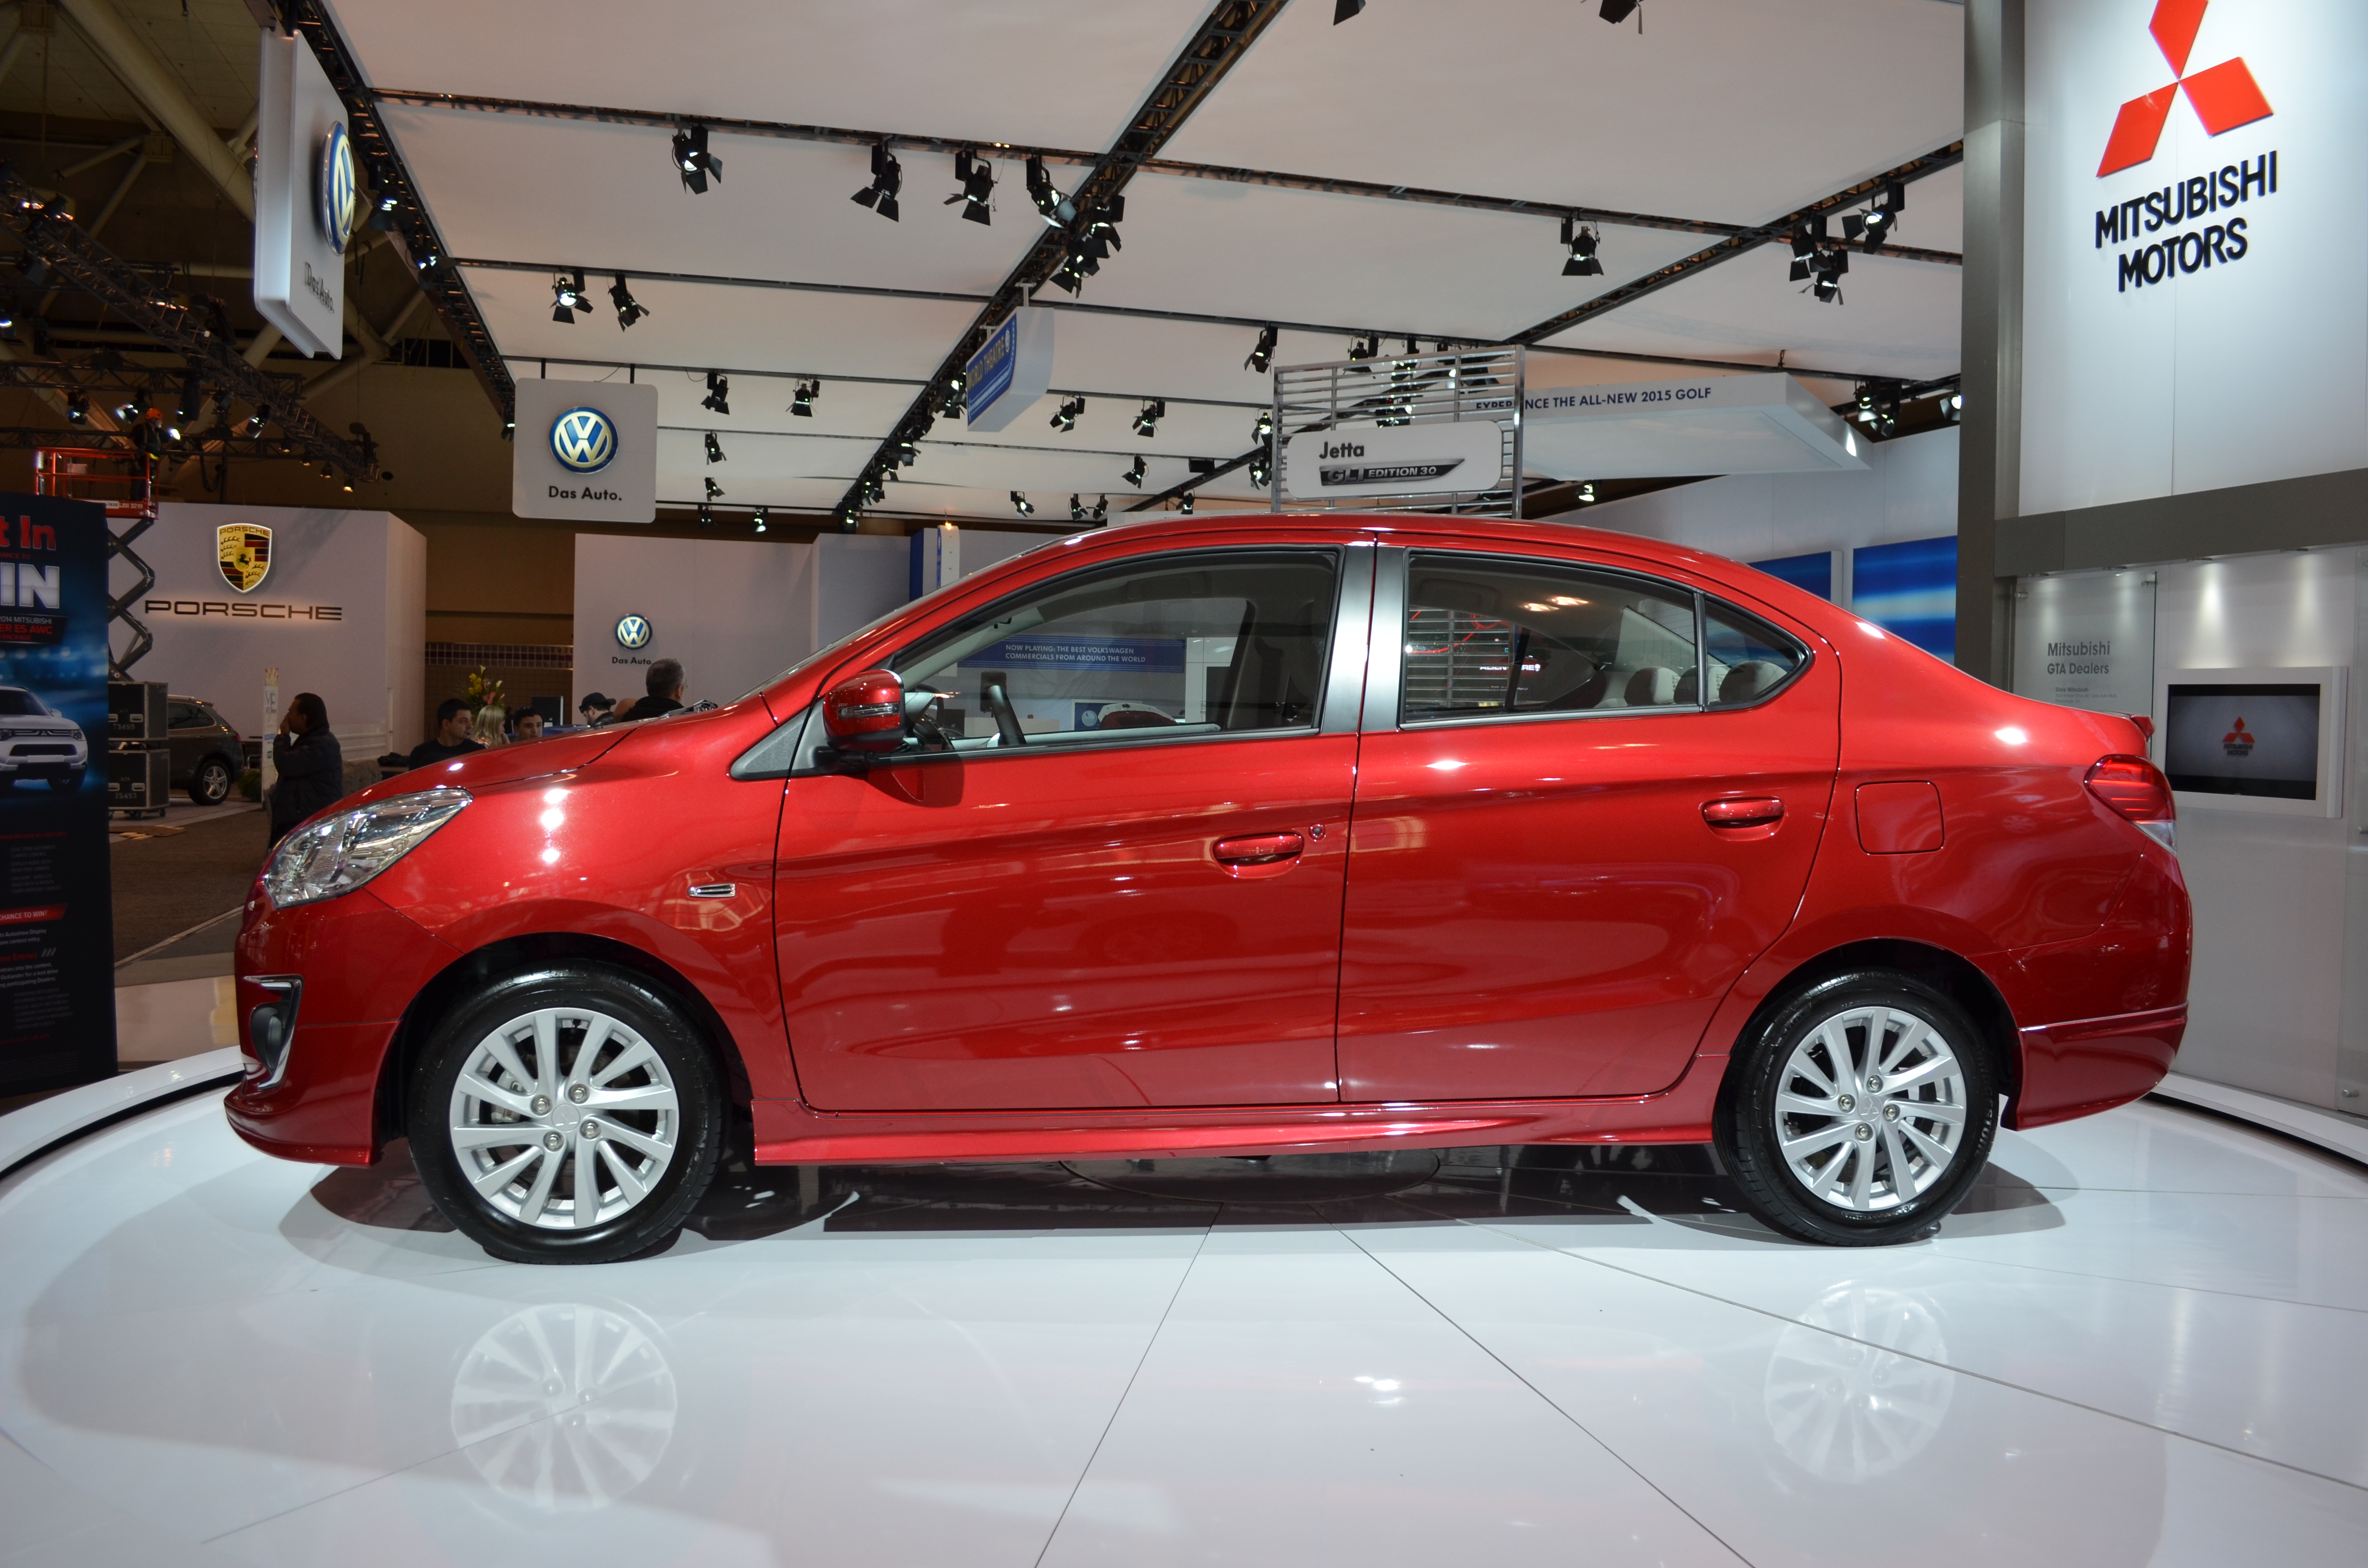 Mitsubishi Mirage G4 hd specifications